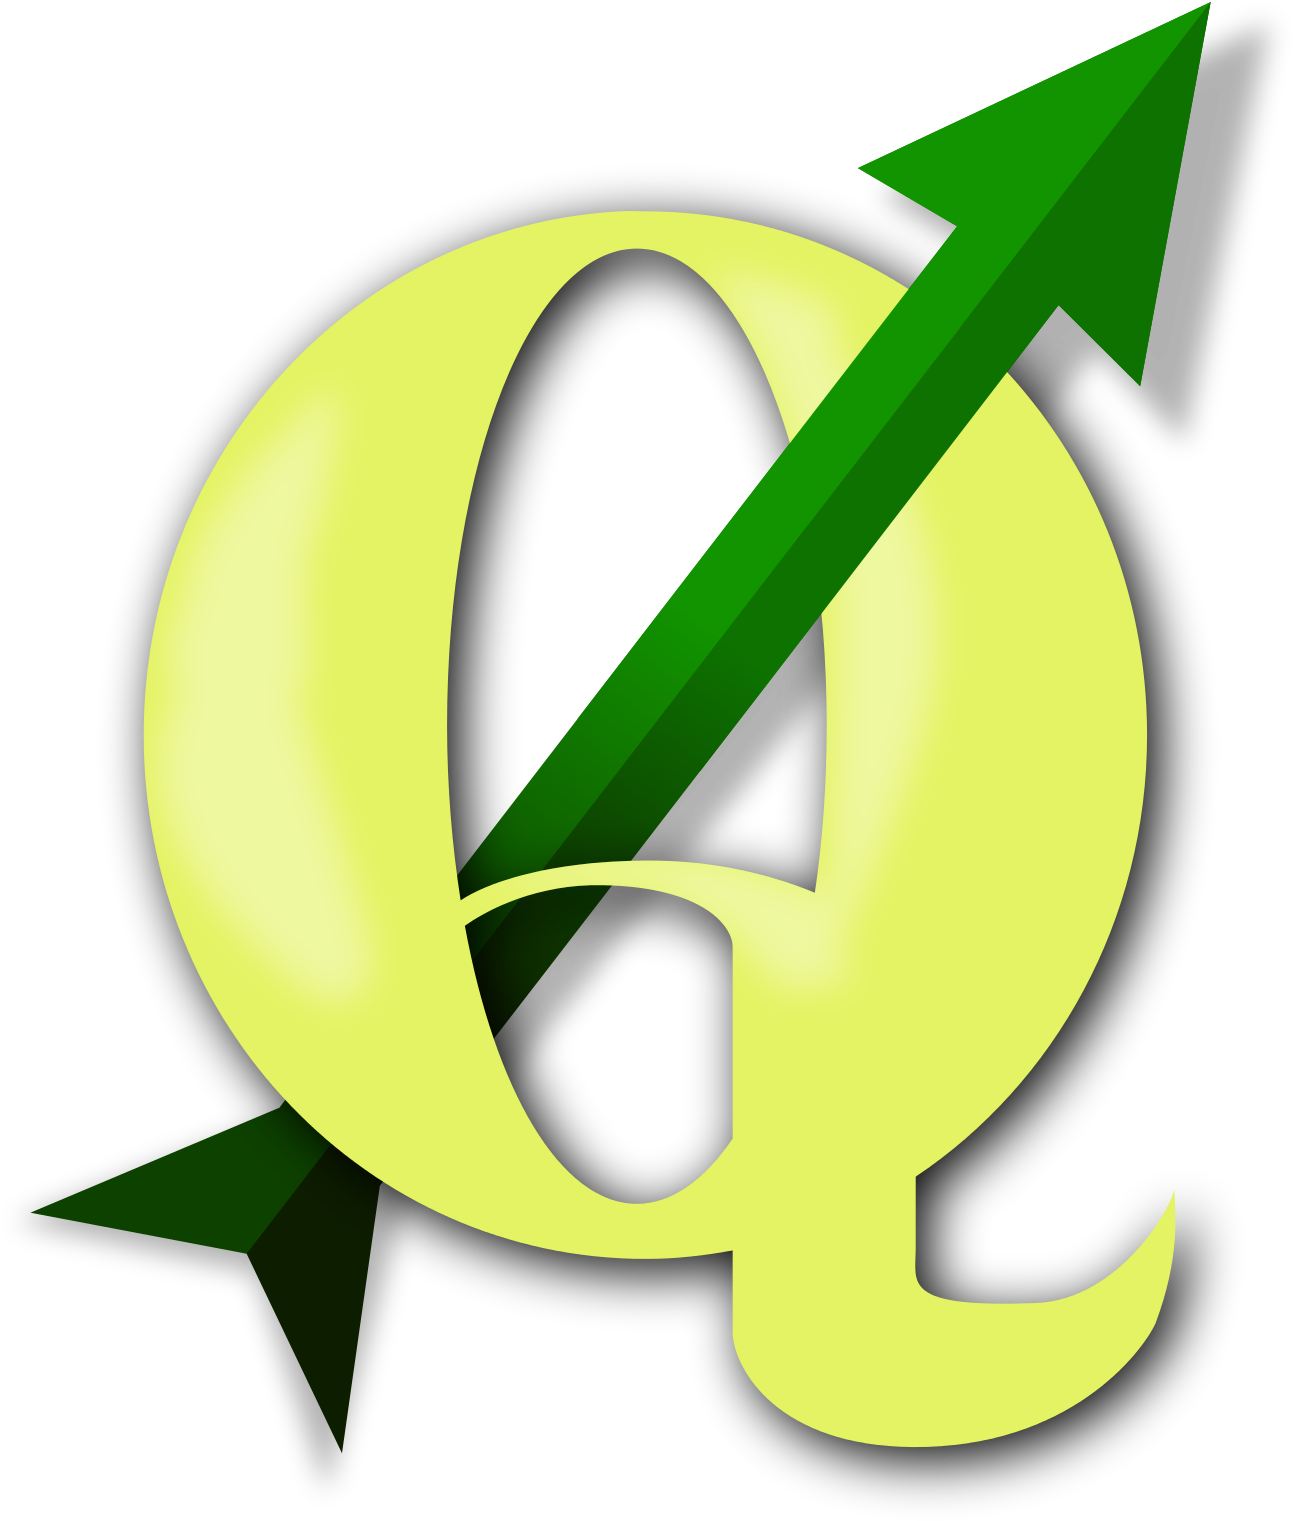 A Letter Q With An Arrow Pointing Up